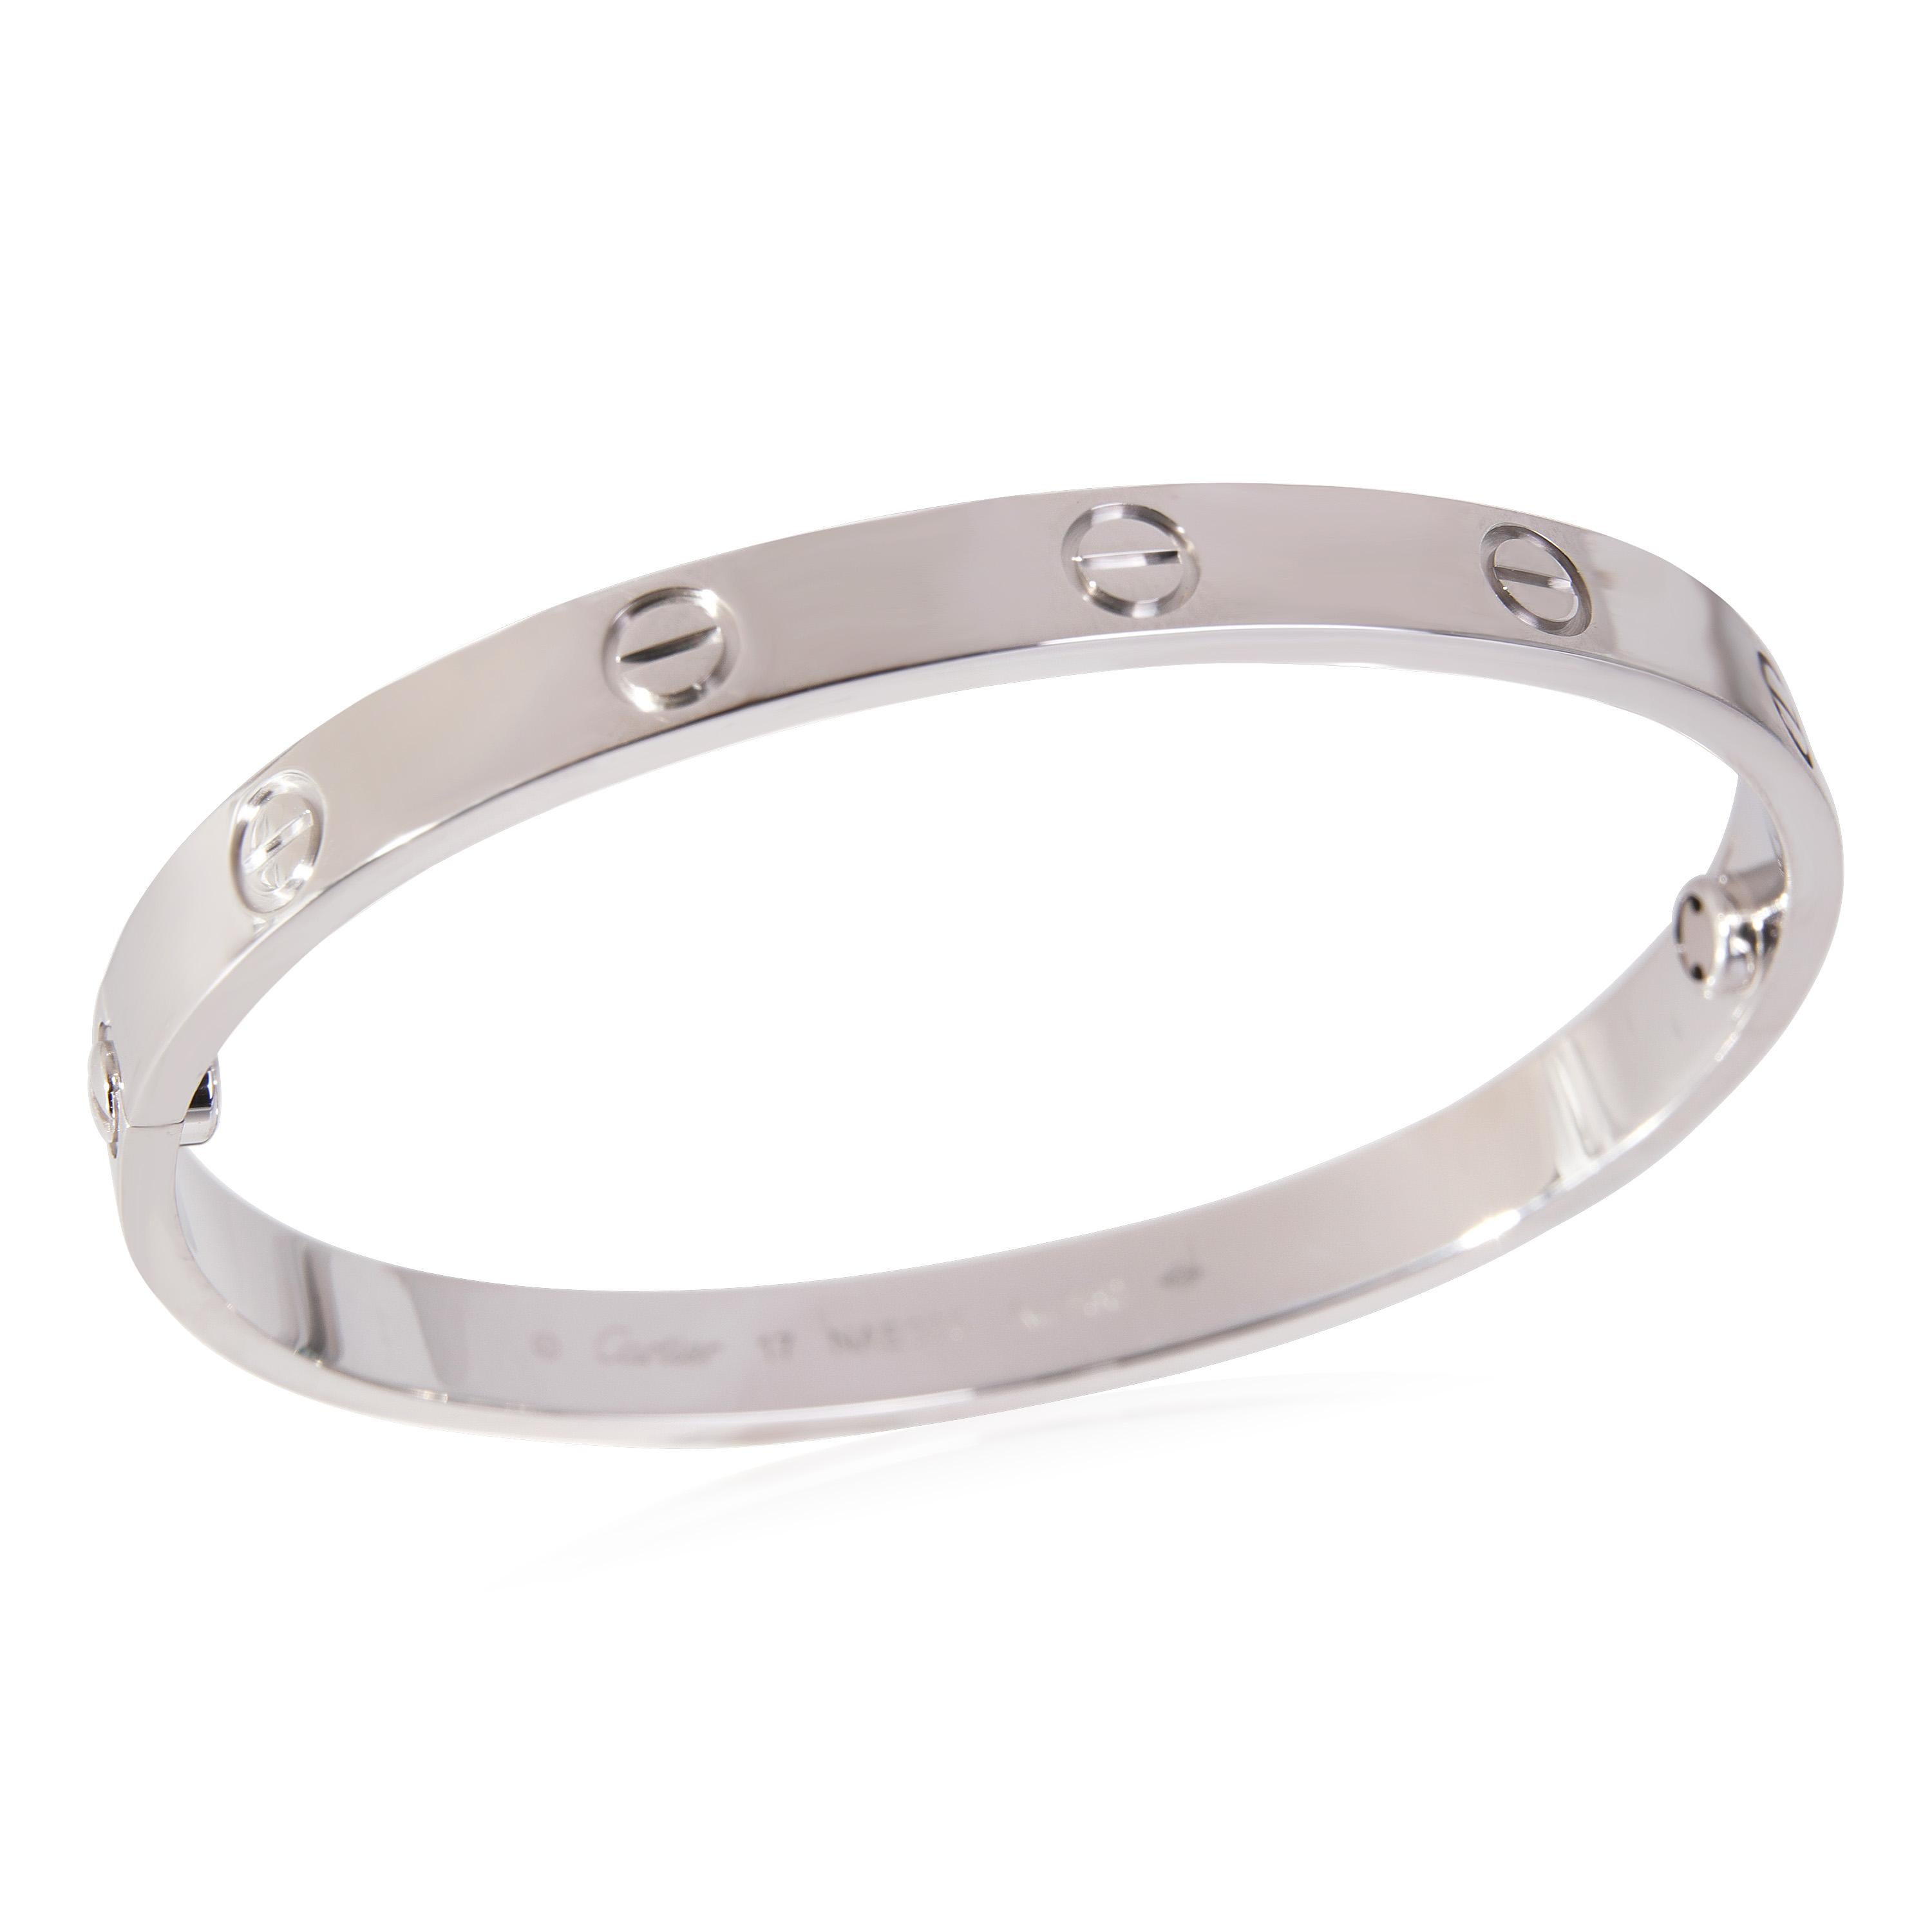 Cartier Love Bracelet in 18k White Gold

PRIMARY DETAILS
SKU: 120747
Listing Title: Cartier Love Bracelet in 18k White Gold
Condition Description: Retails for 7400 USD. In excellent condition and recently polished. Cartier size 17. Comes with